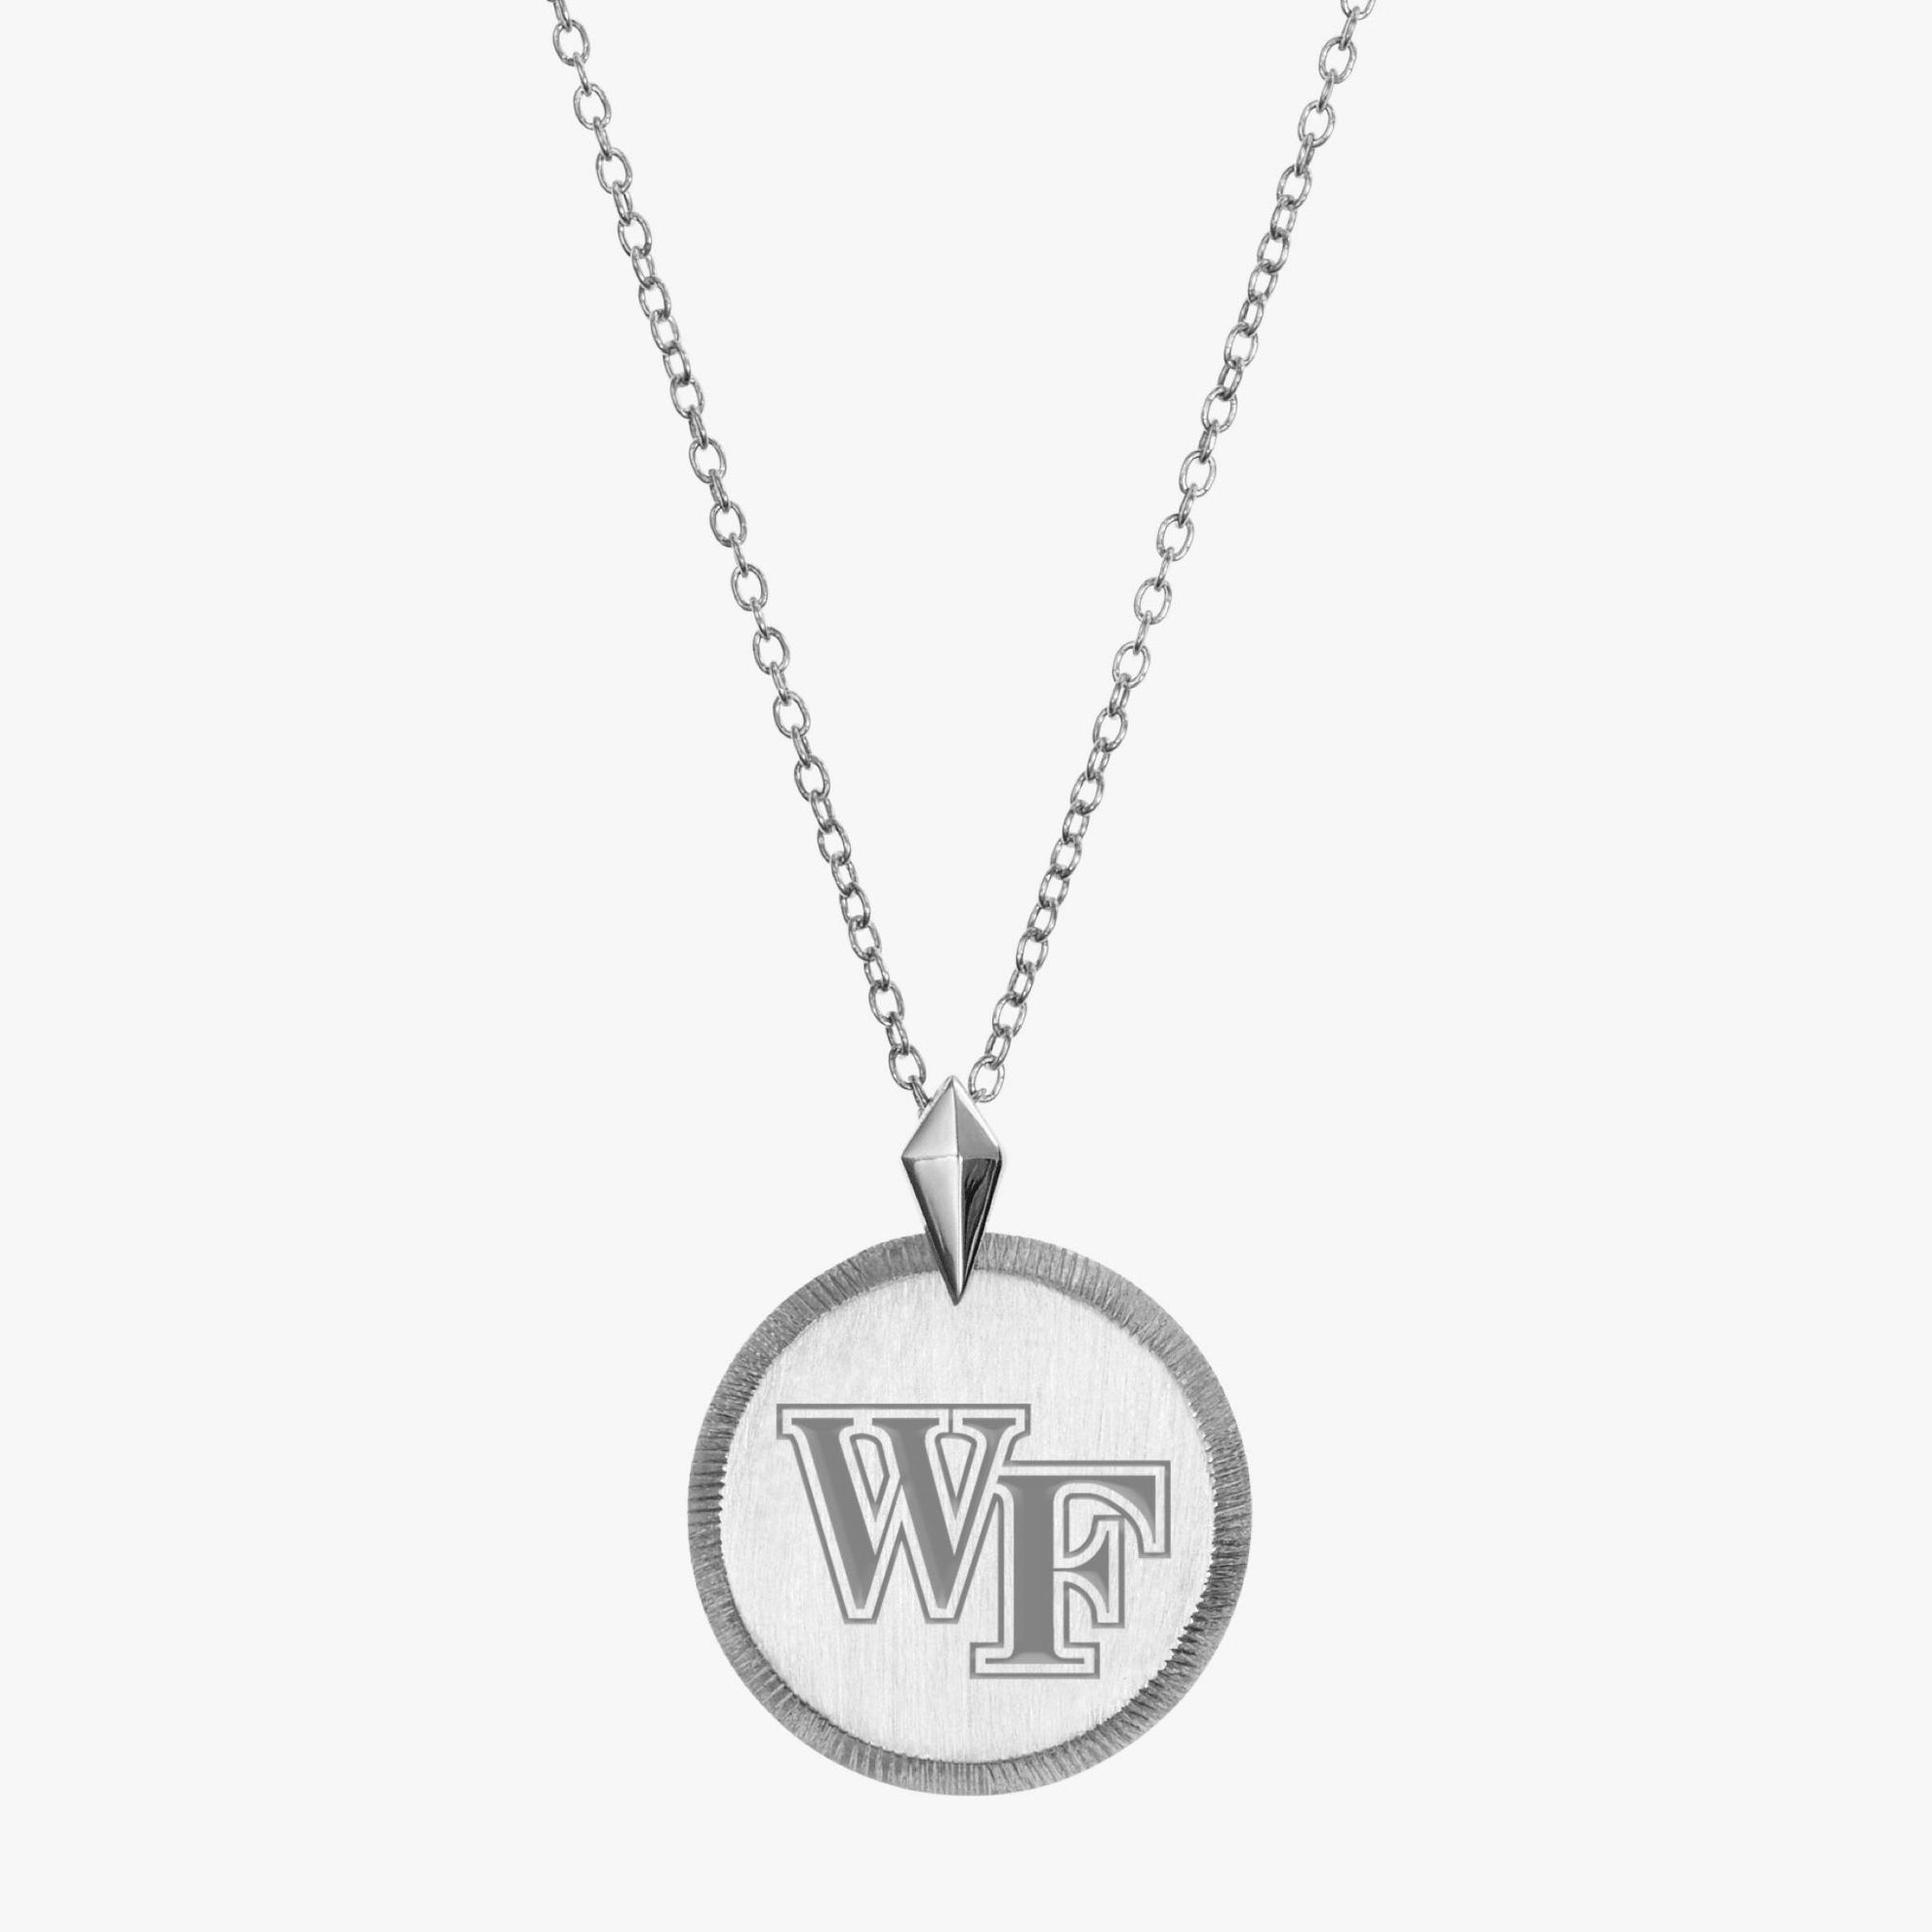 Wake Forest Florentine Necklace Petite Silver